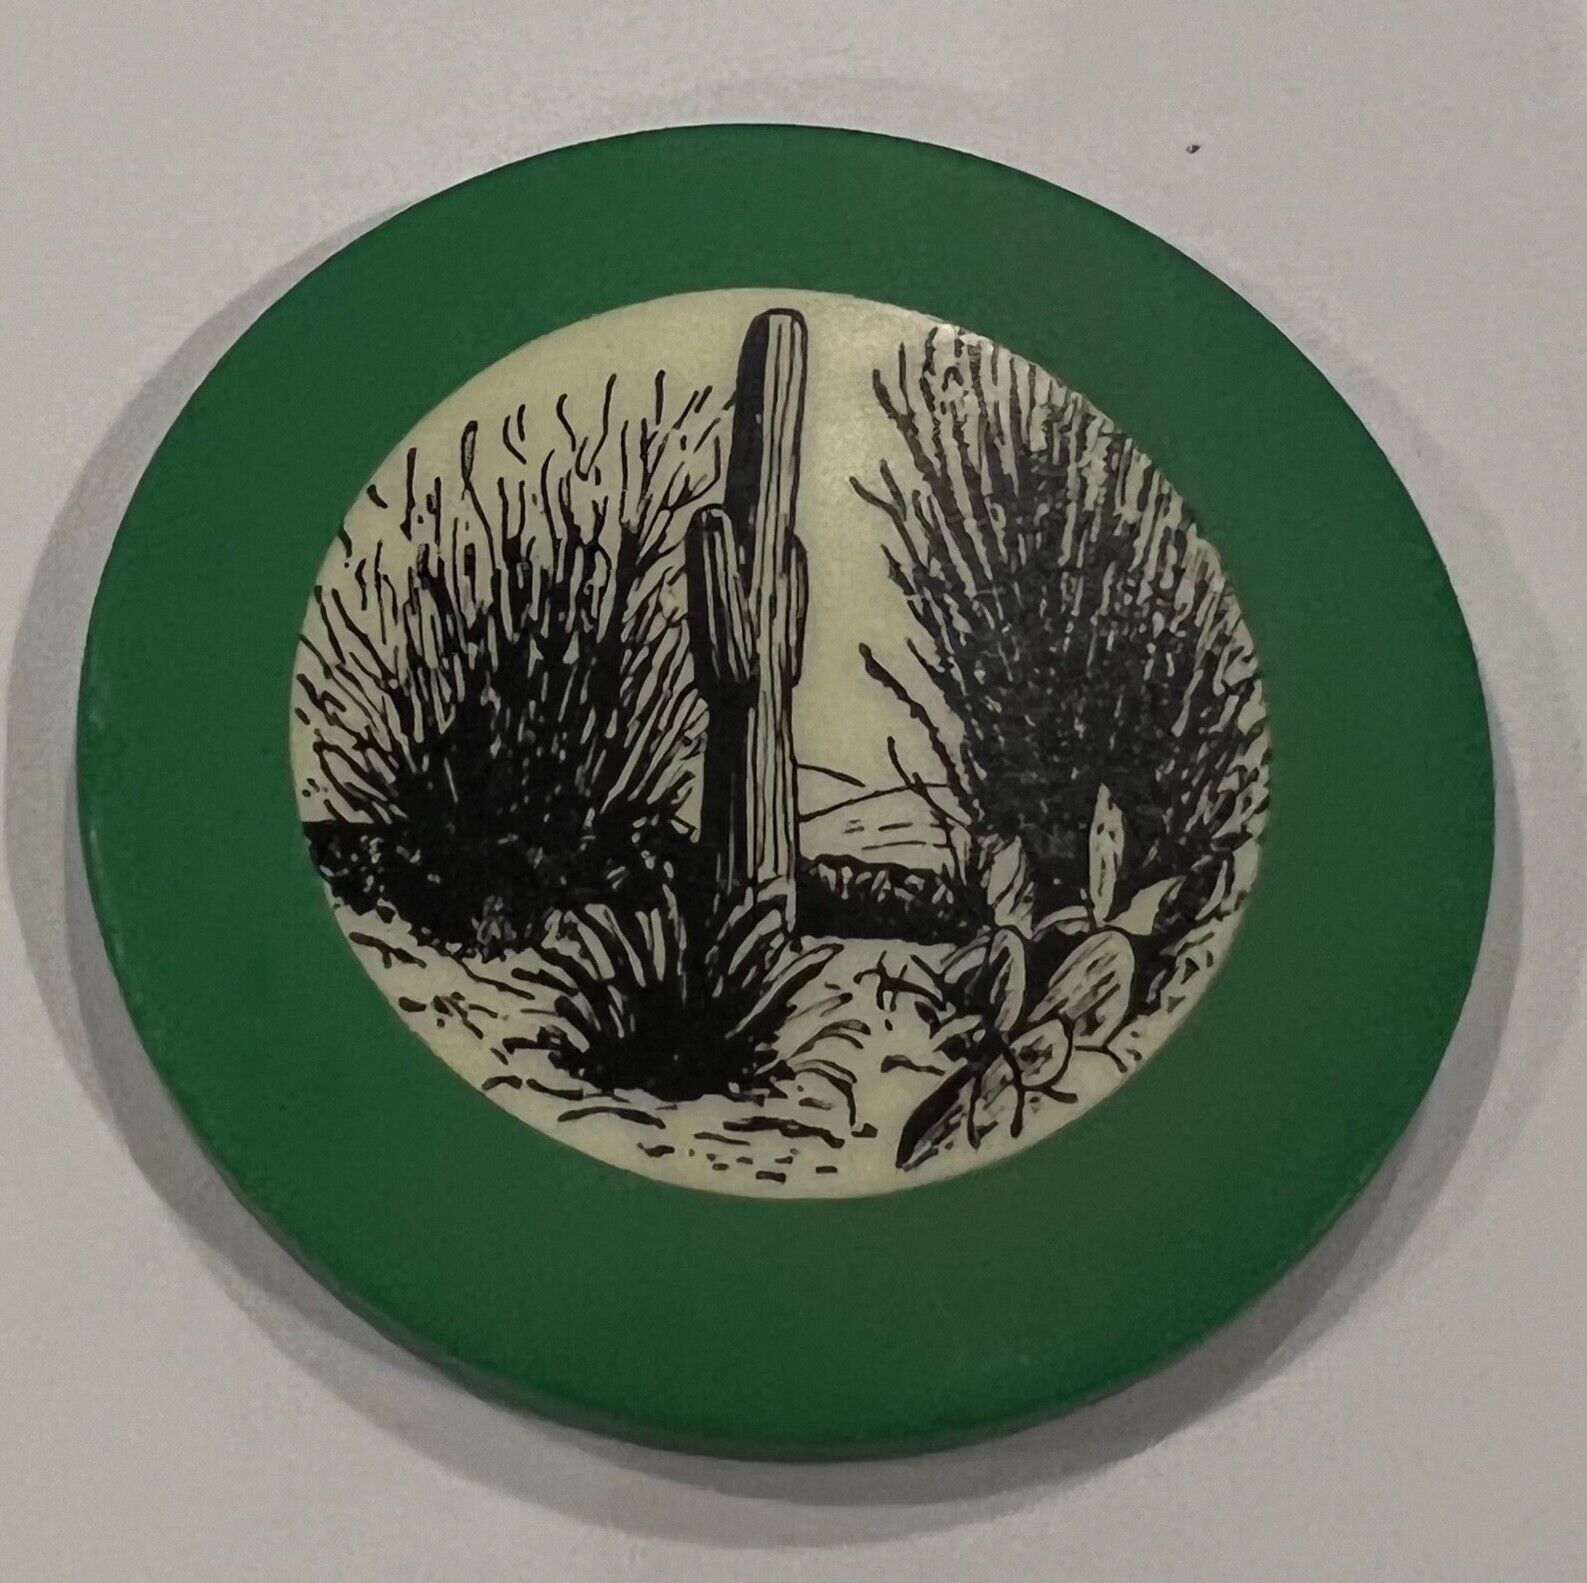 Great Green Desert Cactus Crest and Seal Gorgeous chip